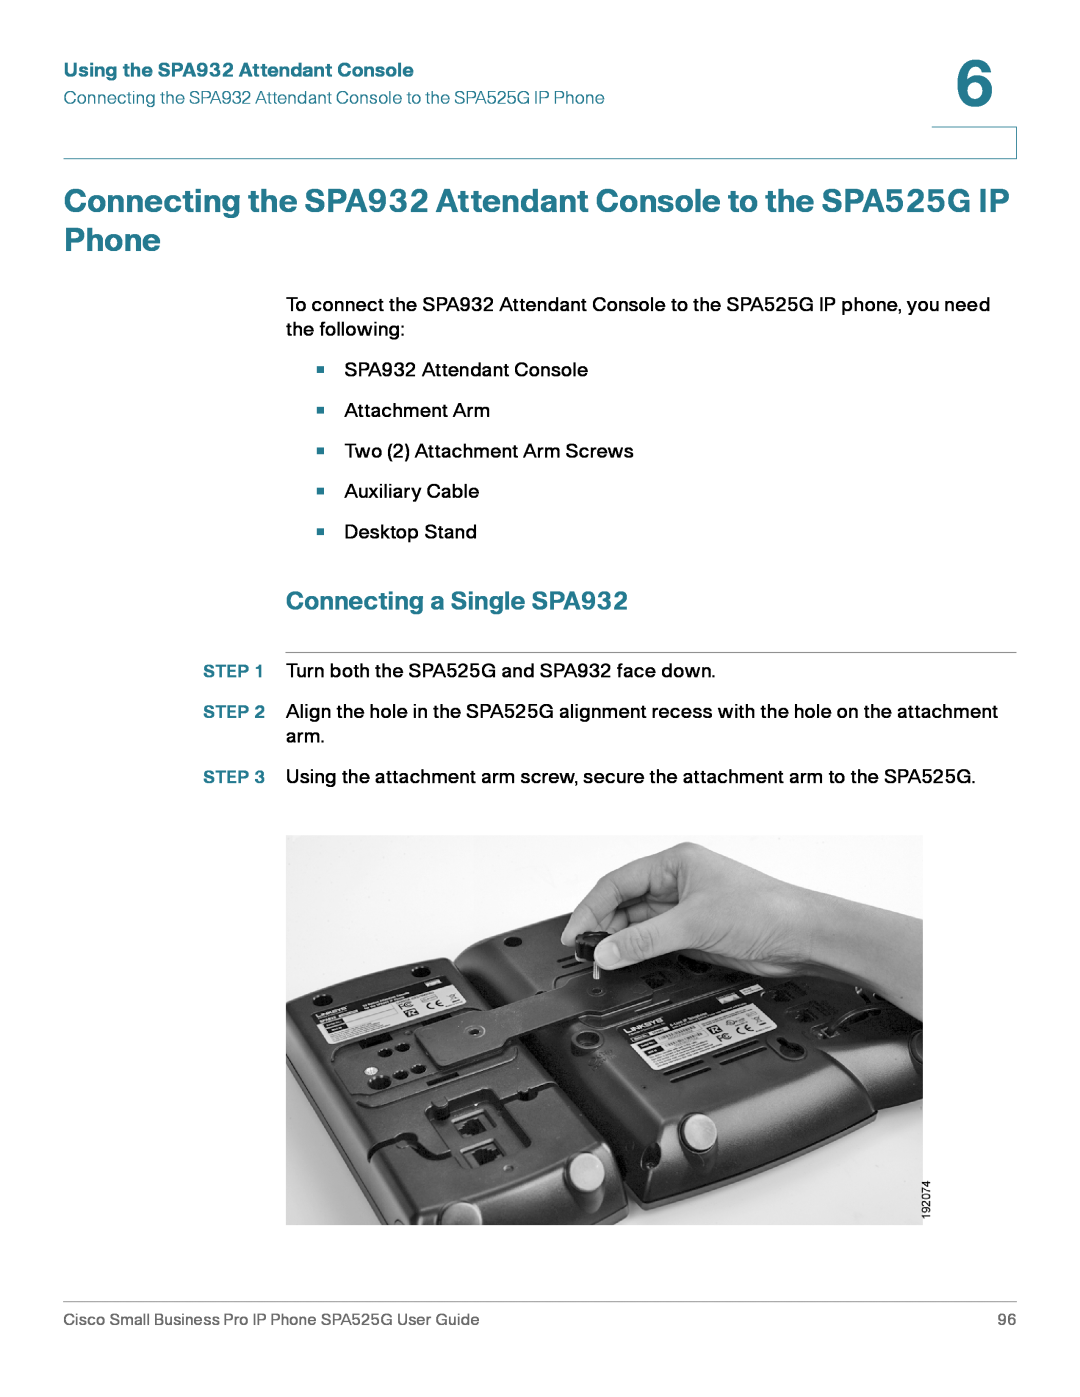 Cisco Systems manual Connecting the SPA932 Attendant Console to the SPA525G IP Phone, Connecting a Single SPA932 